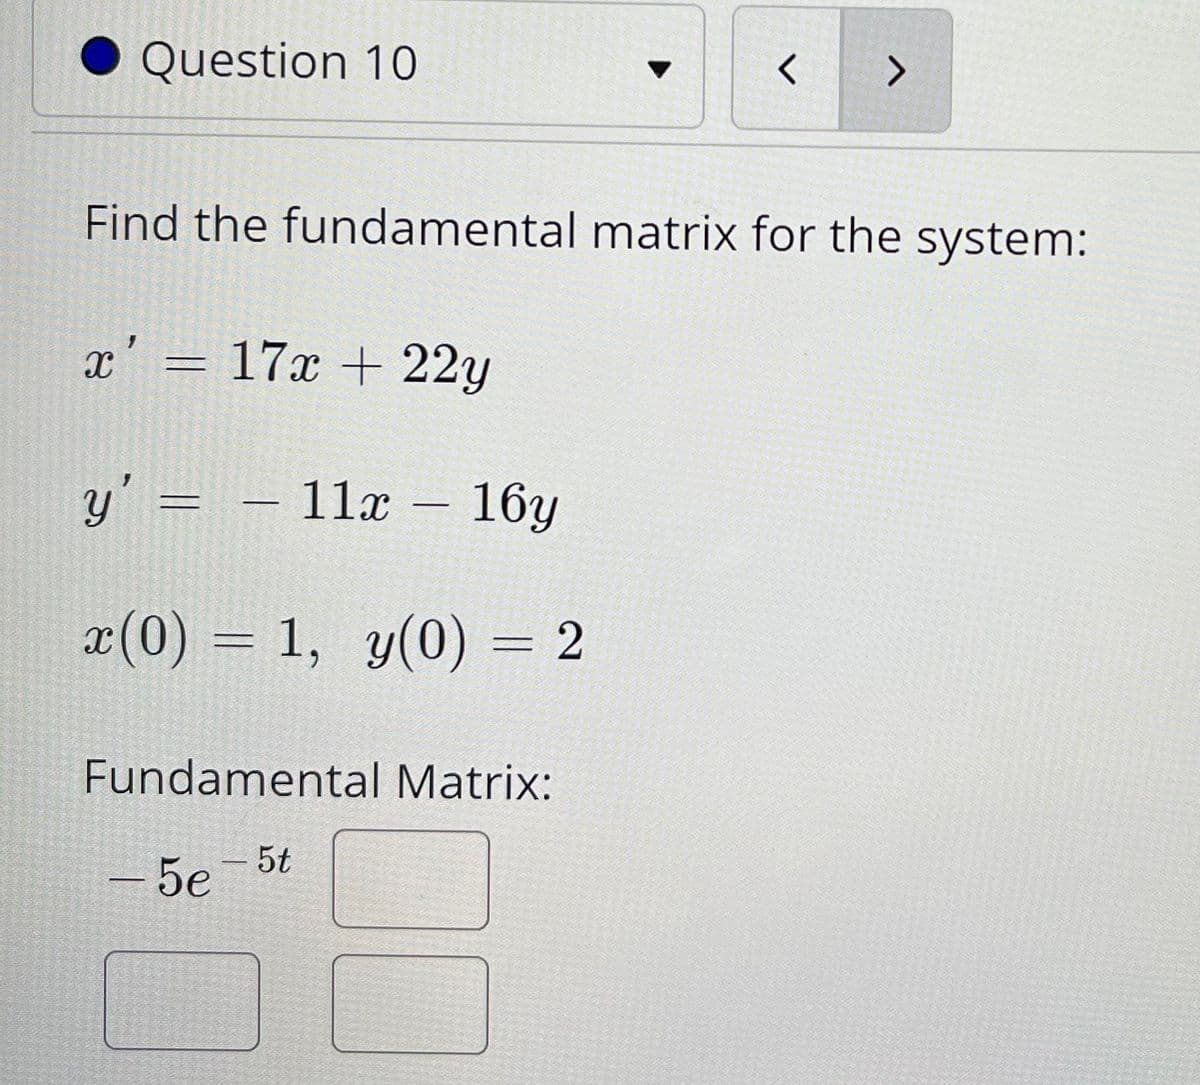 Question 10
Find the fundamental matrix for the system:
x' = 17x + 22y
y' = –
- 11x – 16y
x(0) = 1, y(0) = 2
Fundamental Matrix:
5t
- 5e
